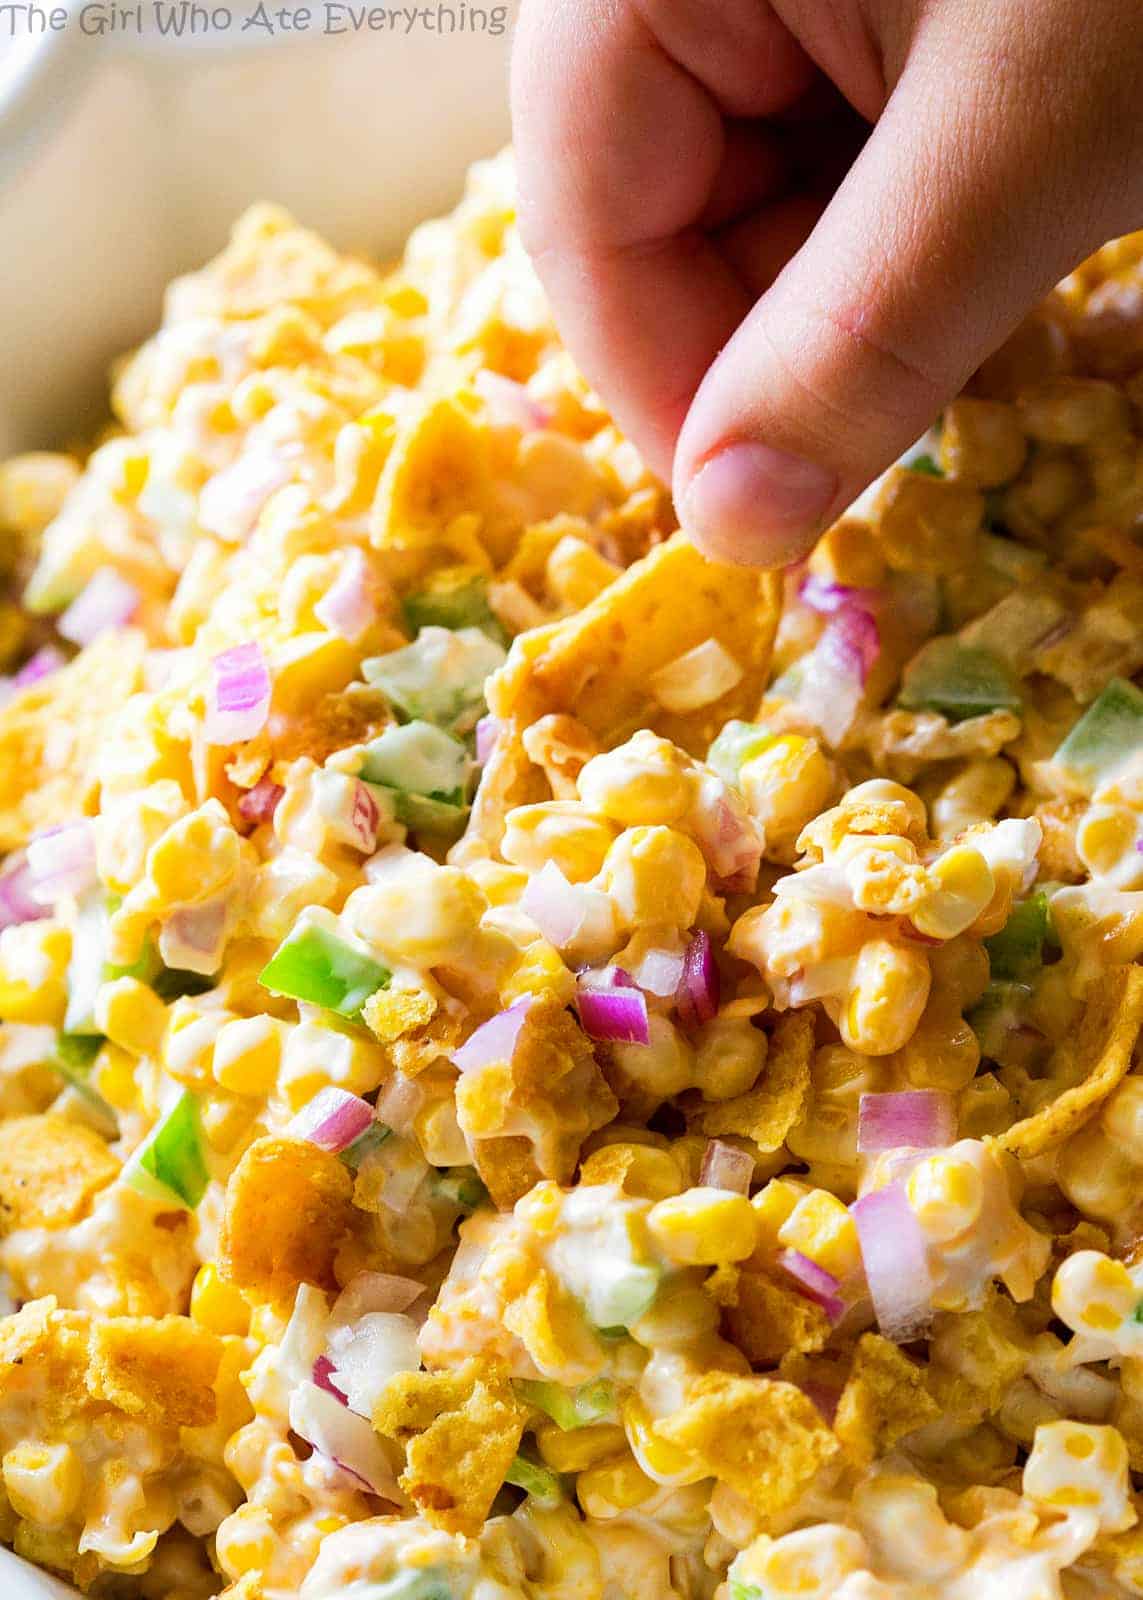 https://www.the-girl-who-ate-everything.com/wp-content/uploads/2016/09/frito-corn-salad-6.jpg